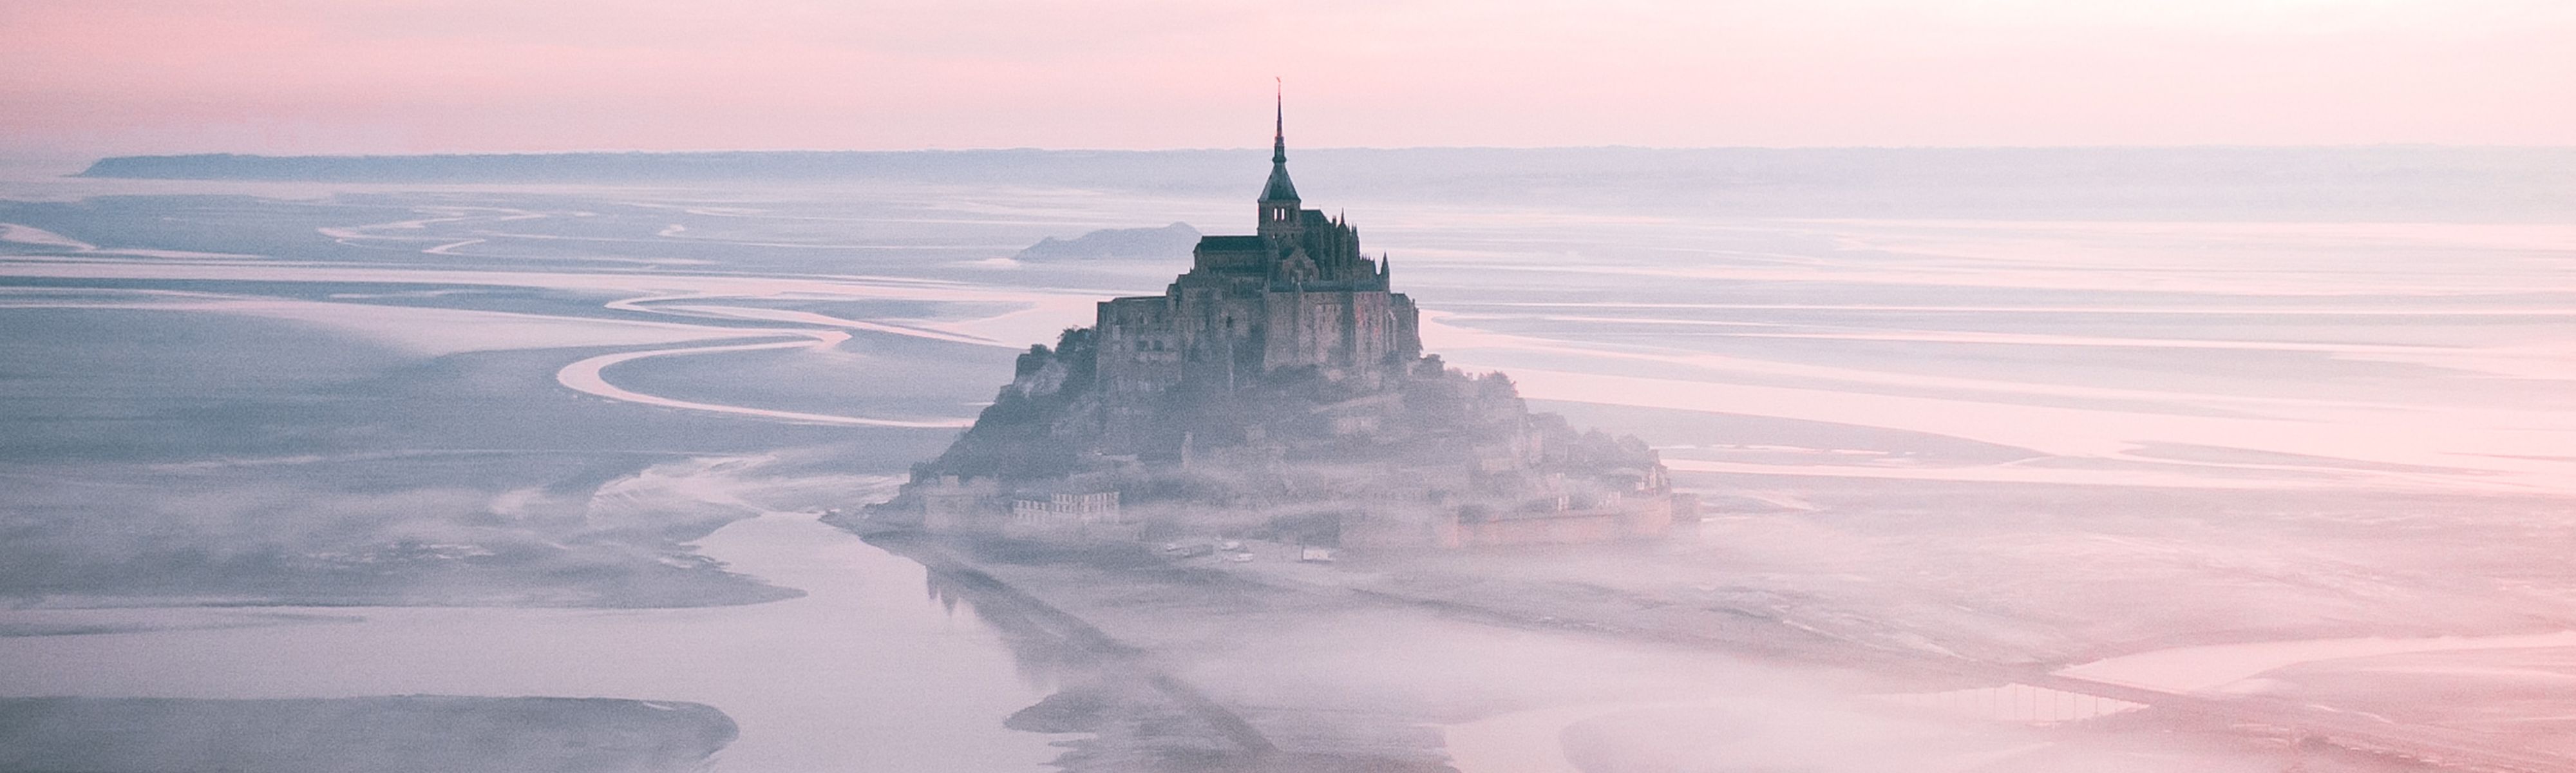 Mont Saint-Michel surrounded by fog at dusk in france